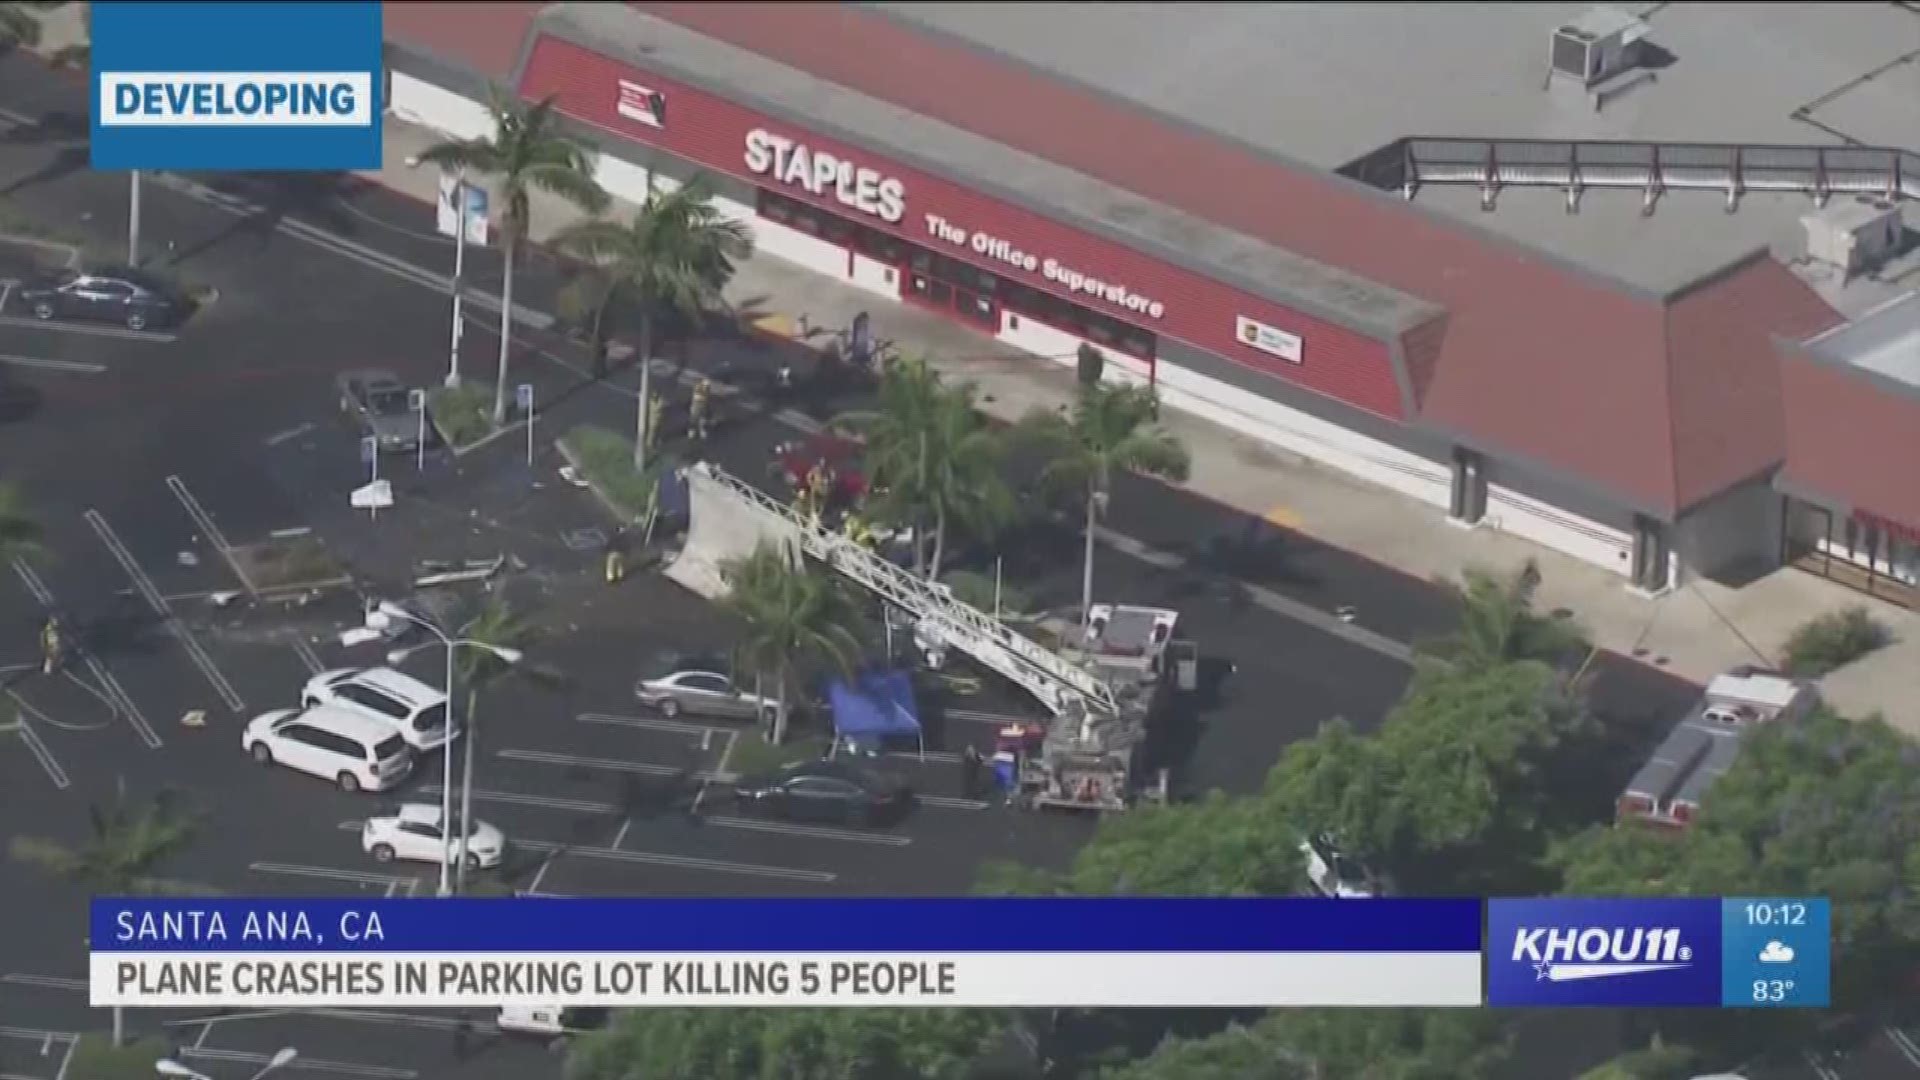 A small, twin-engine Cessna bound for John Wayne Airport in Orange County crashed into the parking lot of a Staples office supply store on Sunday, killing all five people aboard, Orange County fire officials said.